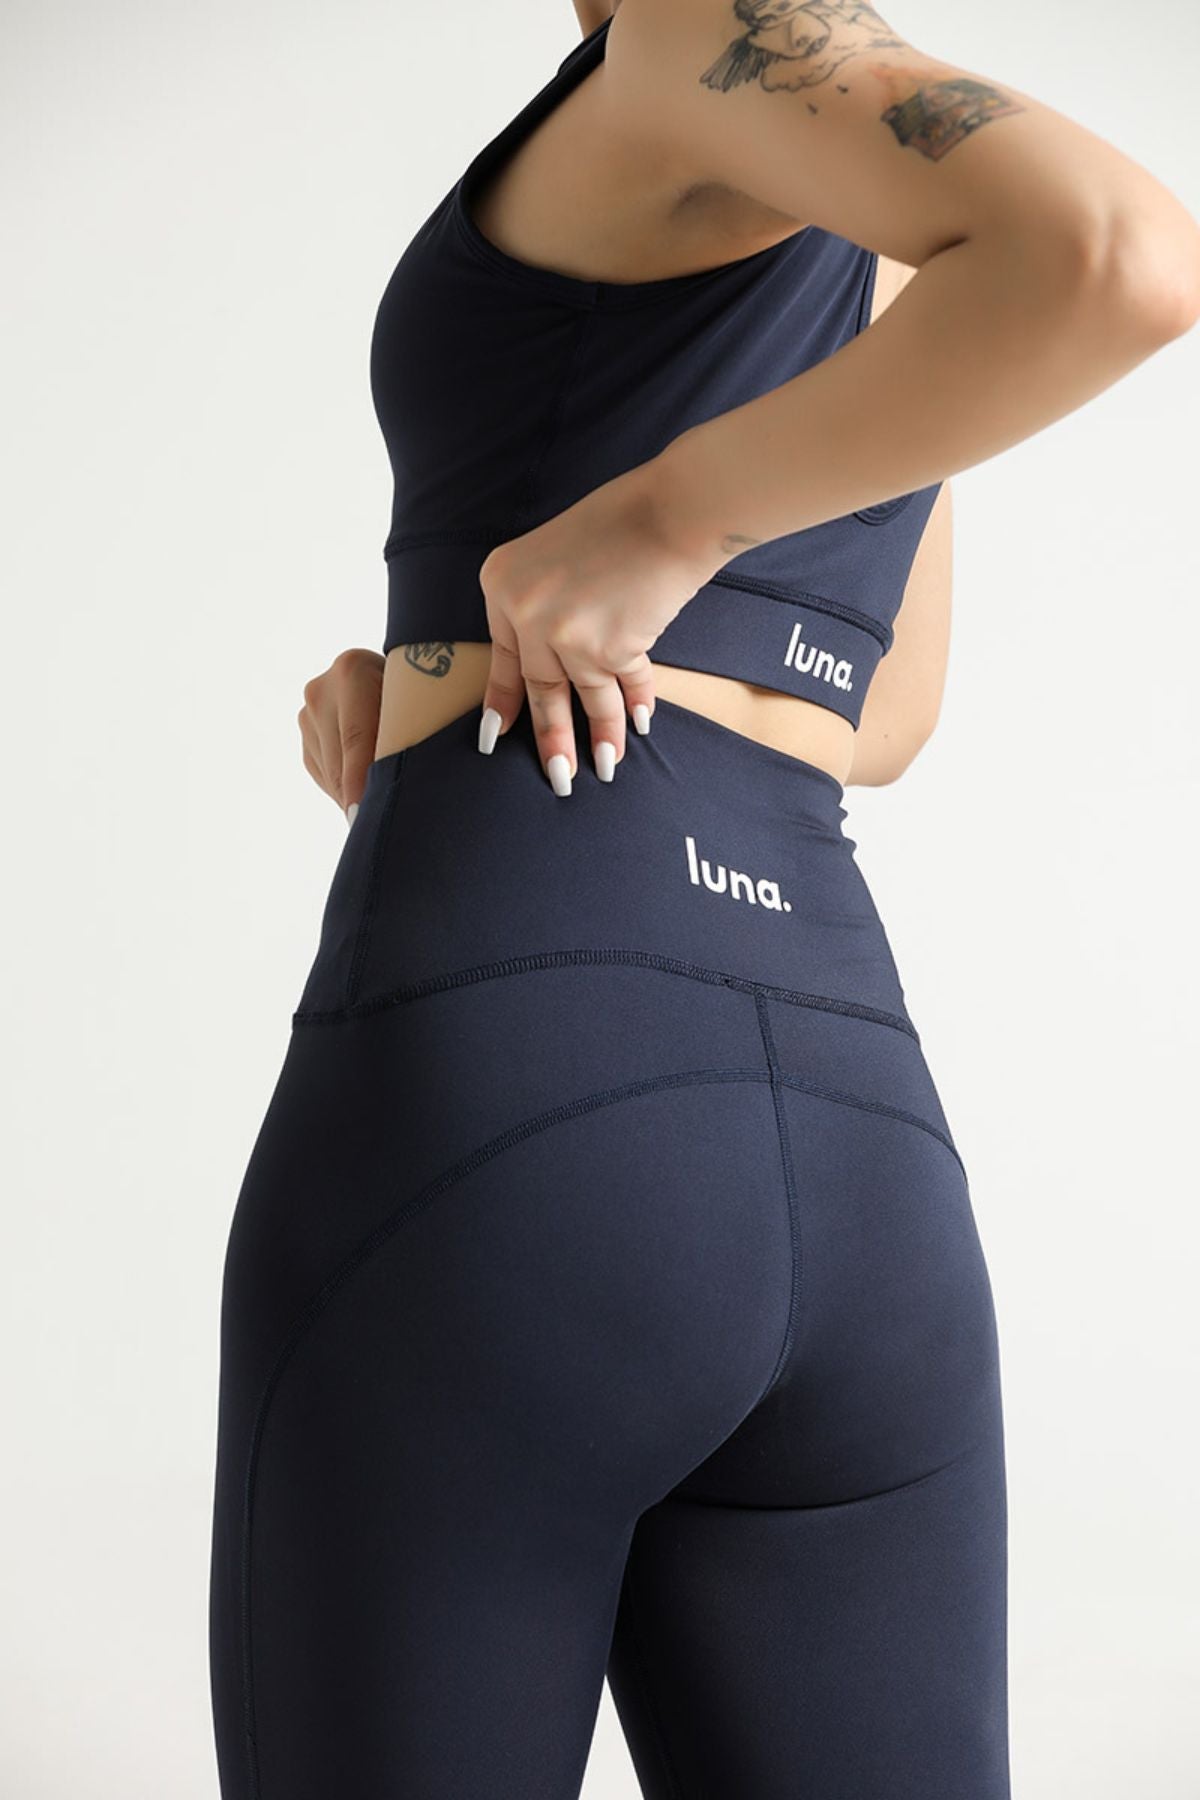 LUNA HURRICANE CONTRAST HIGH WAISTED LEGGINGS - The Orion Fit